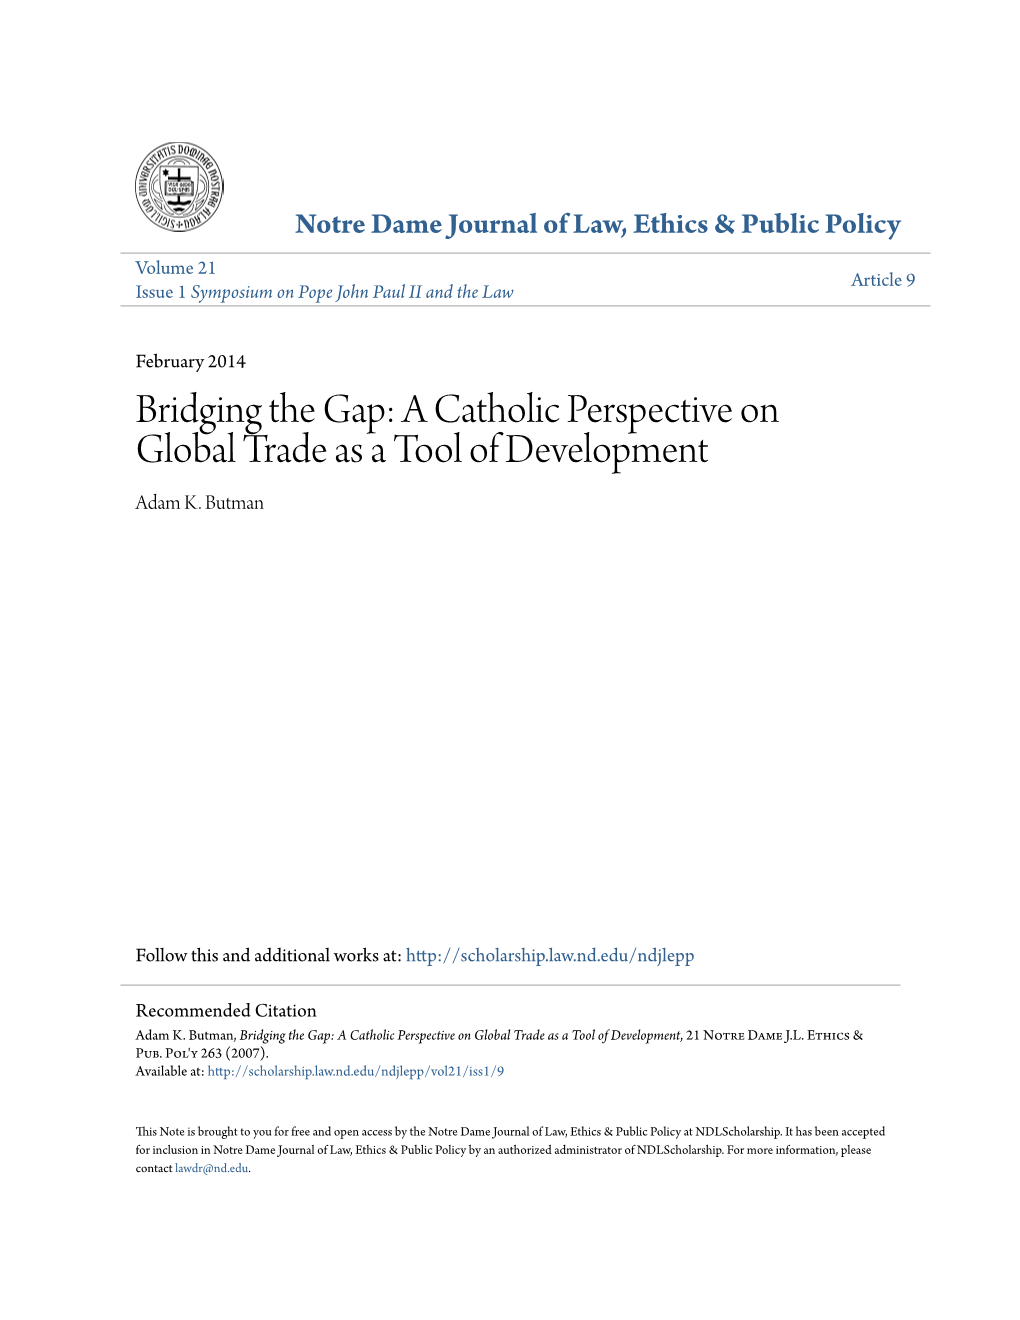 A Catholic Perspective on Global Trade As a Tool of Development Adam K